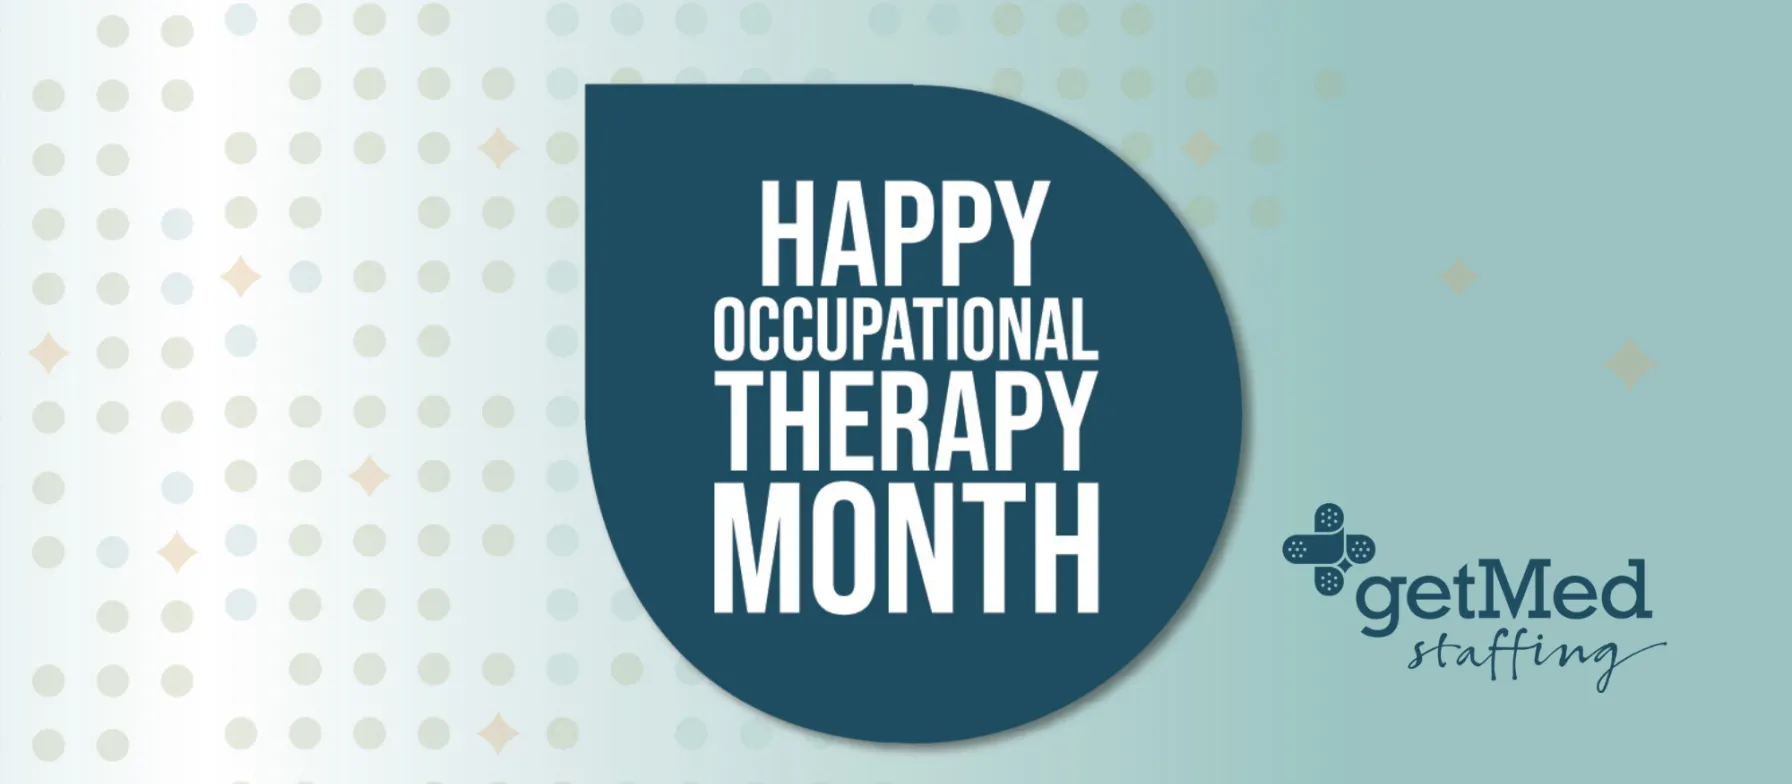 Happy Occupational Therapy Month! 